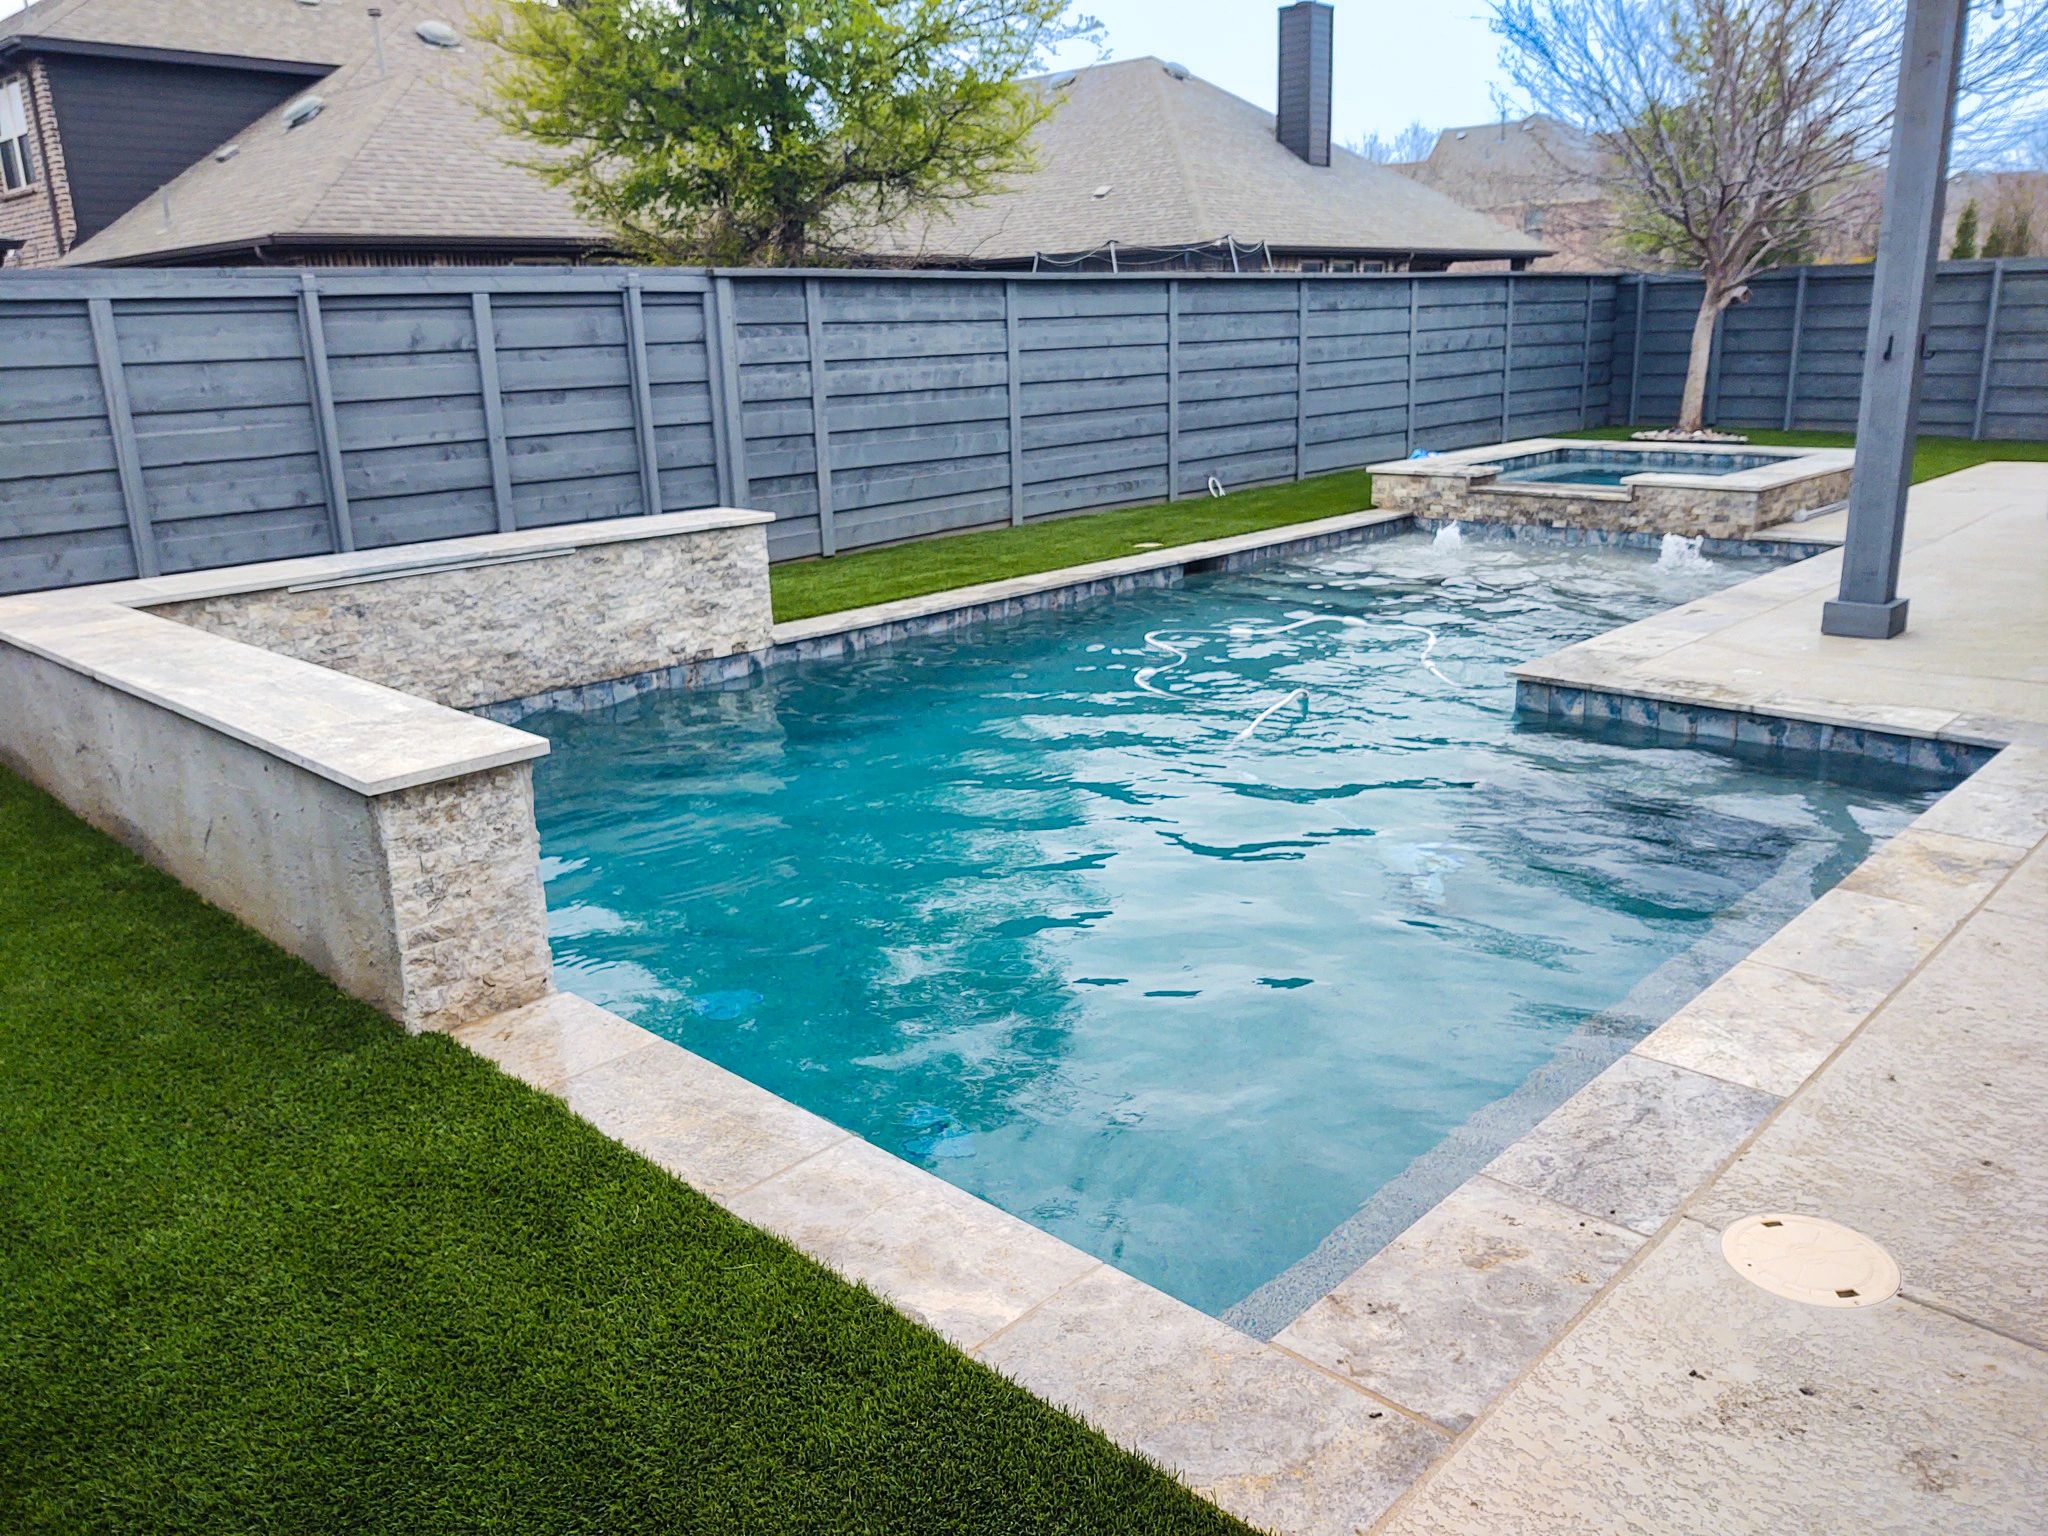 dallas richardson build a new pool 6 Dallas Pool Builders: Transforming Dreams into Reality with Integrity Pools